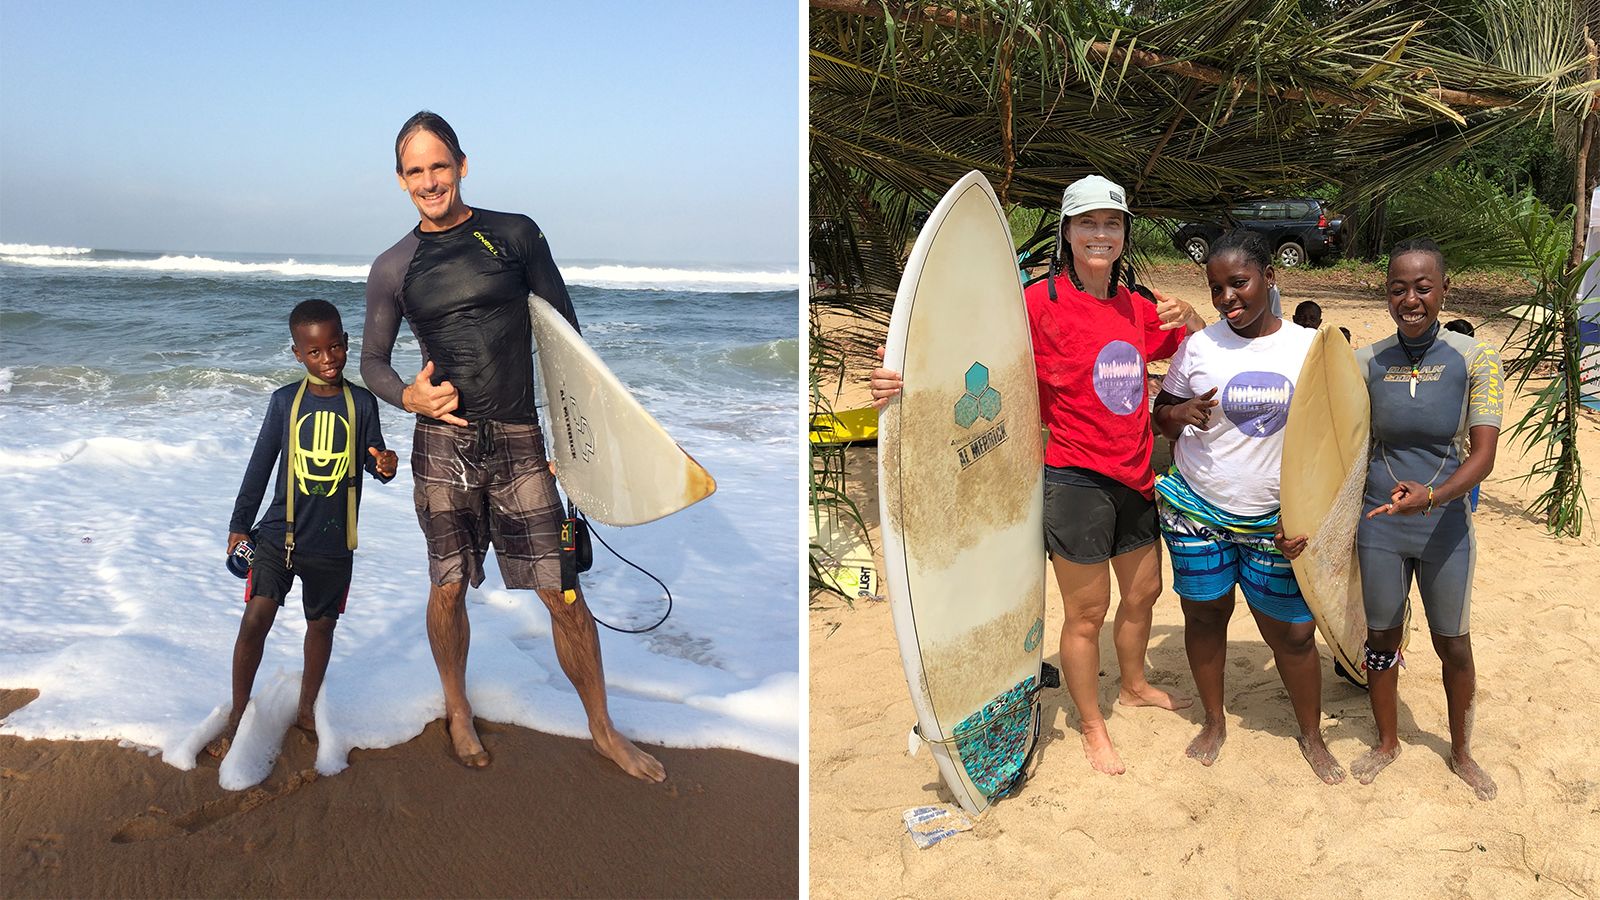 Shown here with some of the community's youth surfers, Canadians Kent Bubbs (left) and Landis Wyatt (right) relocated to Liberia 15 years ago and have become integral to Robertsport's surf culture, setting up its annual competition and establishing surf tourism initiatives to help diversity the local economy.